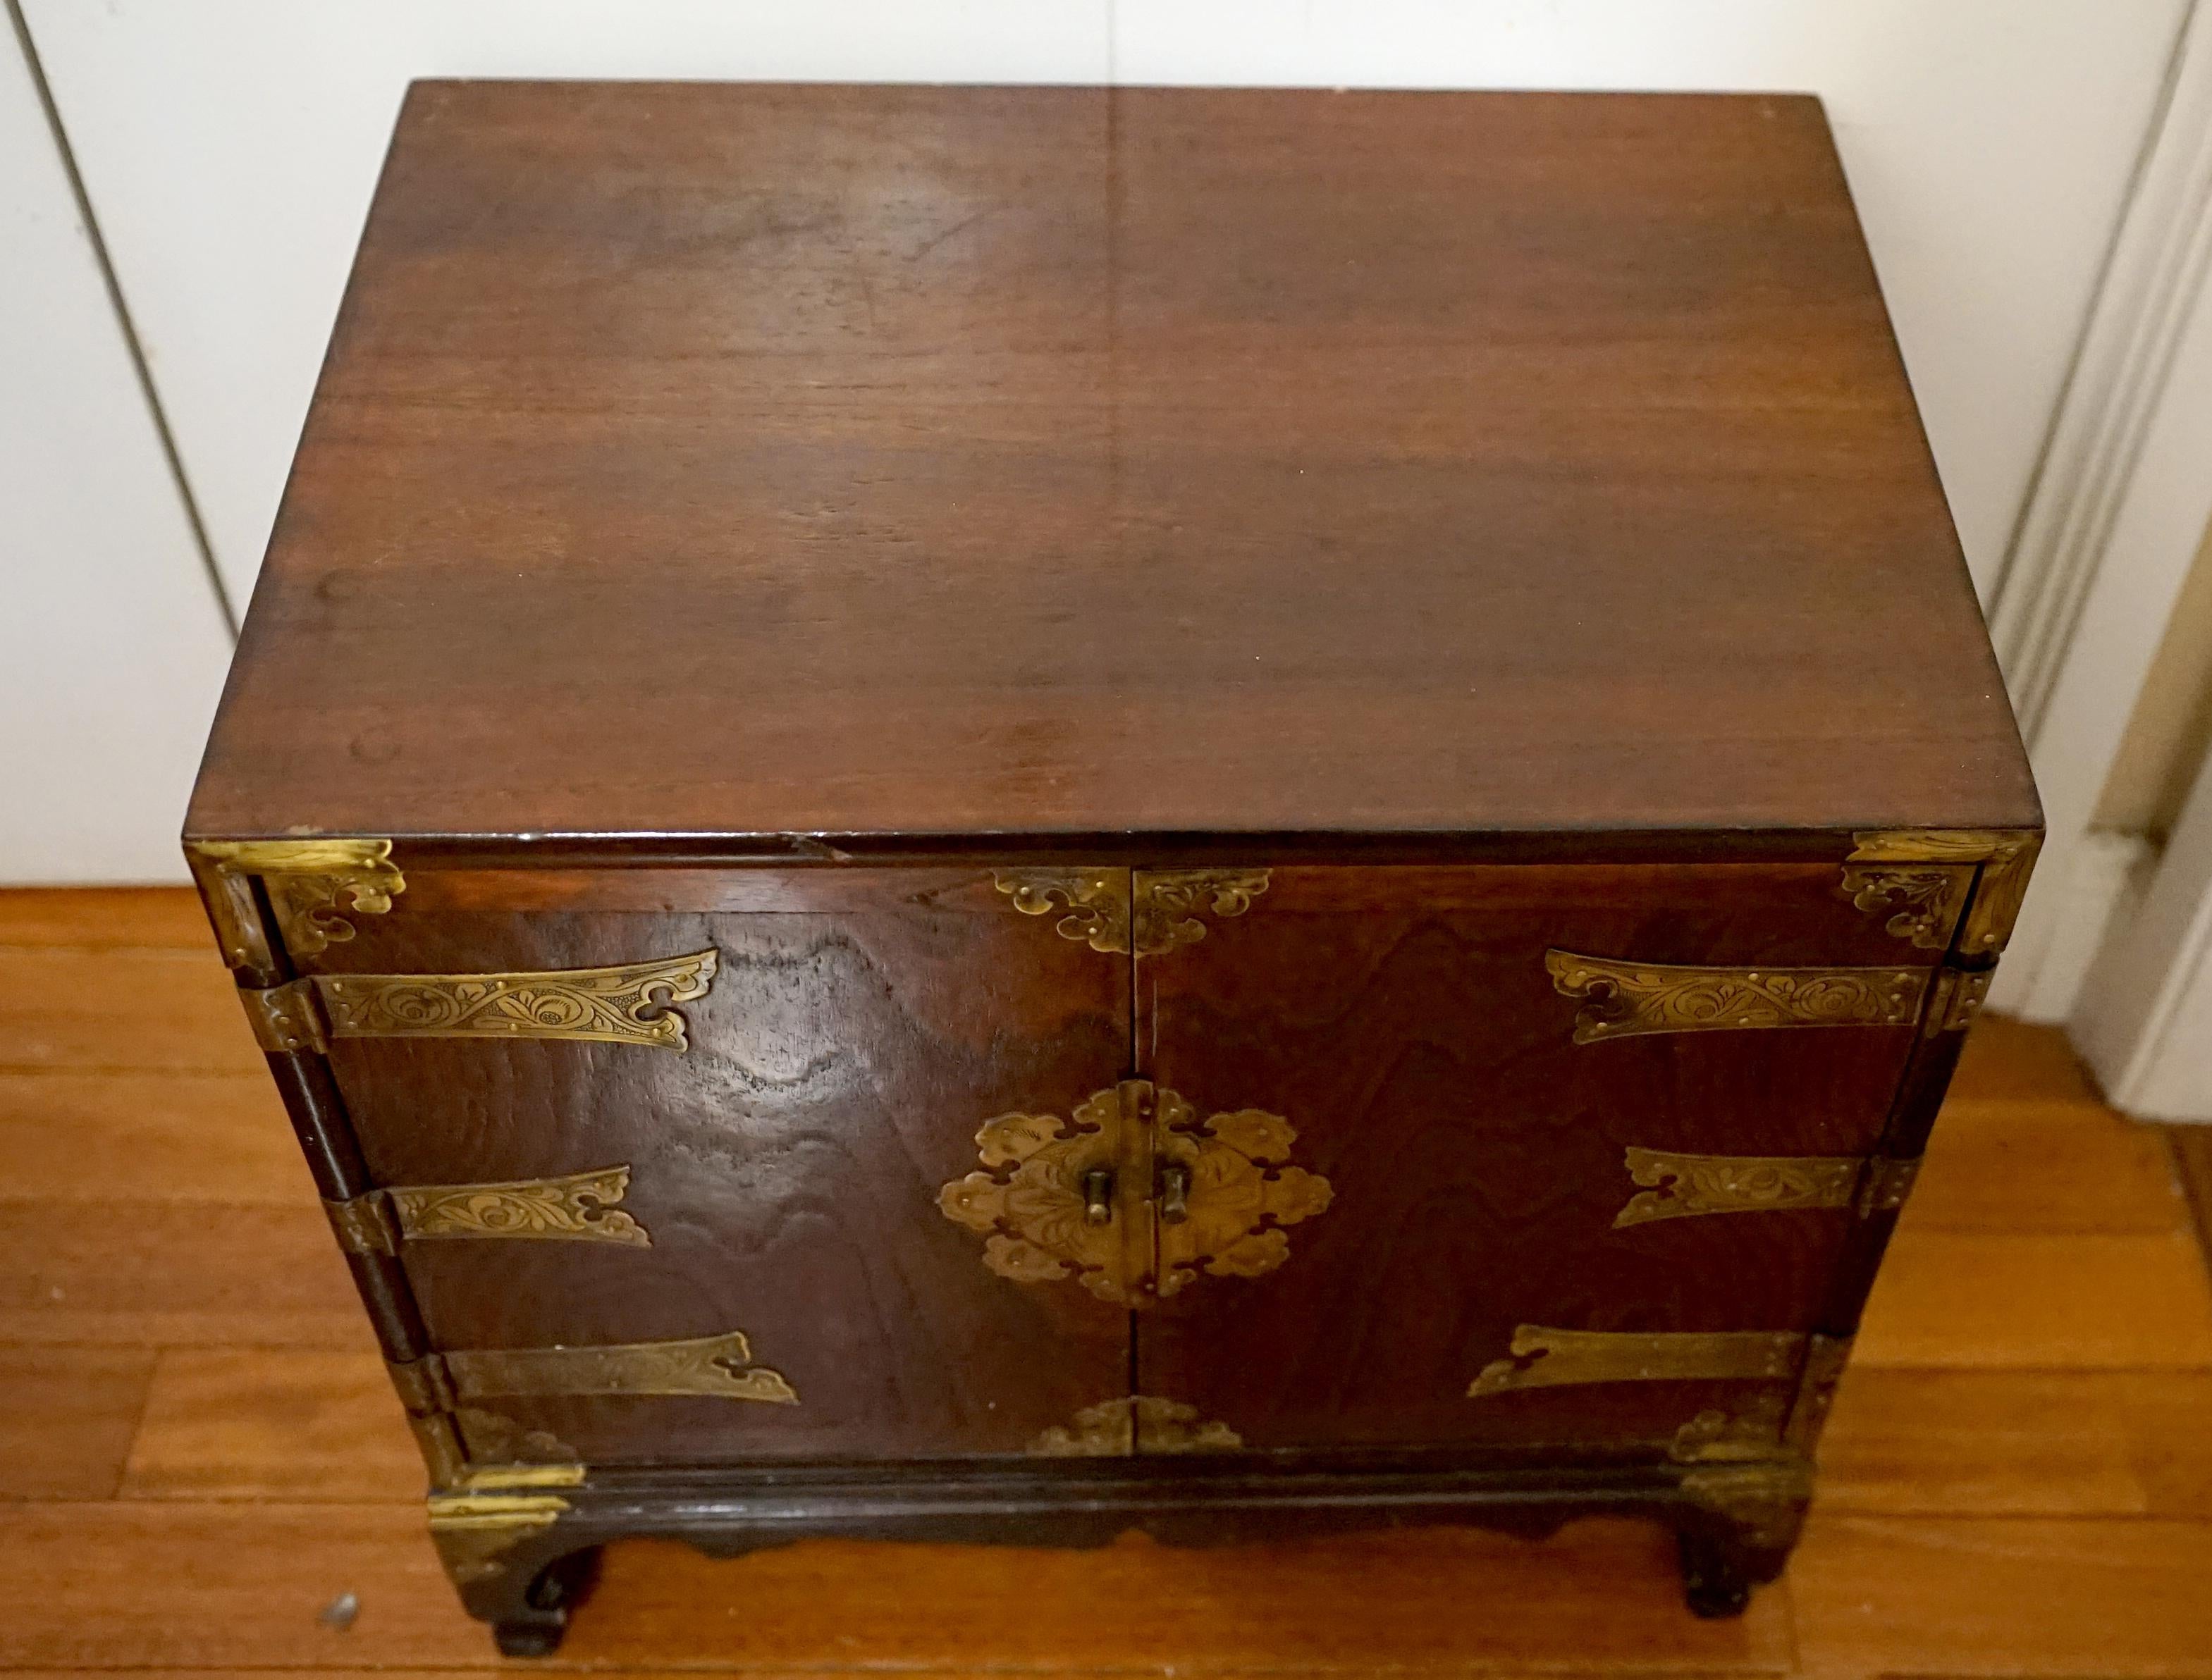 Vintage Burl Mahogany Tansu Chest with Paper Antique Calligraphy Lining For Sale 8